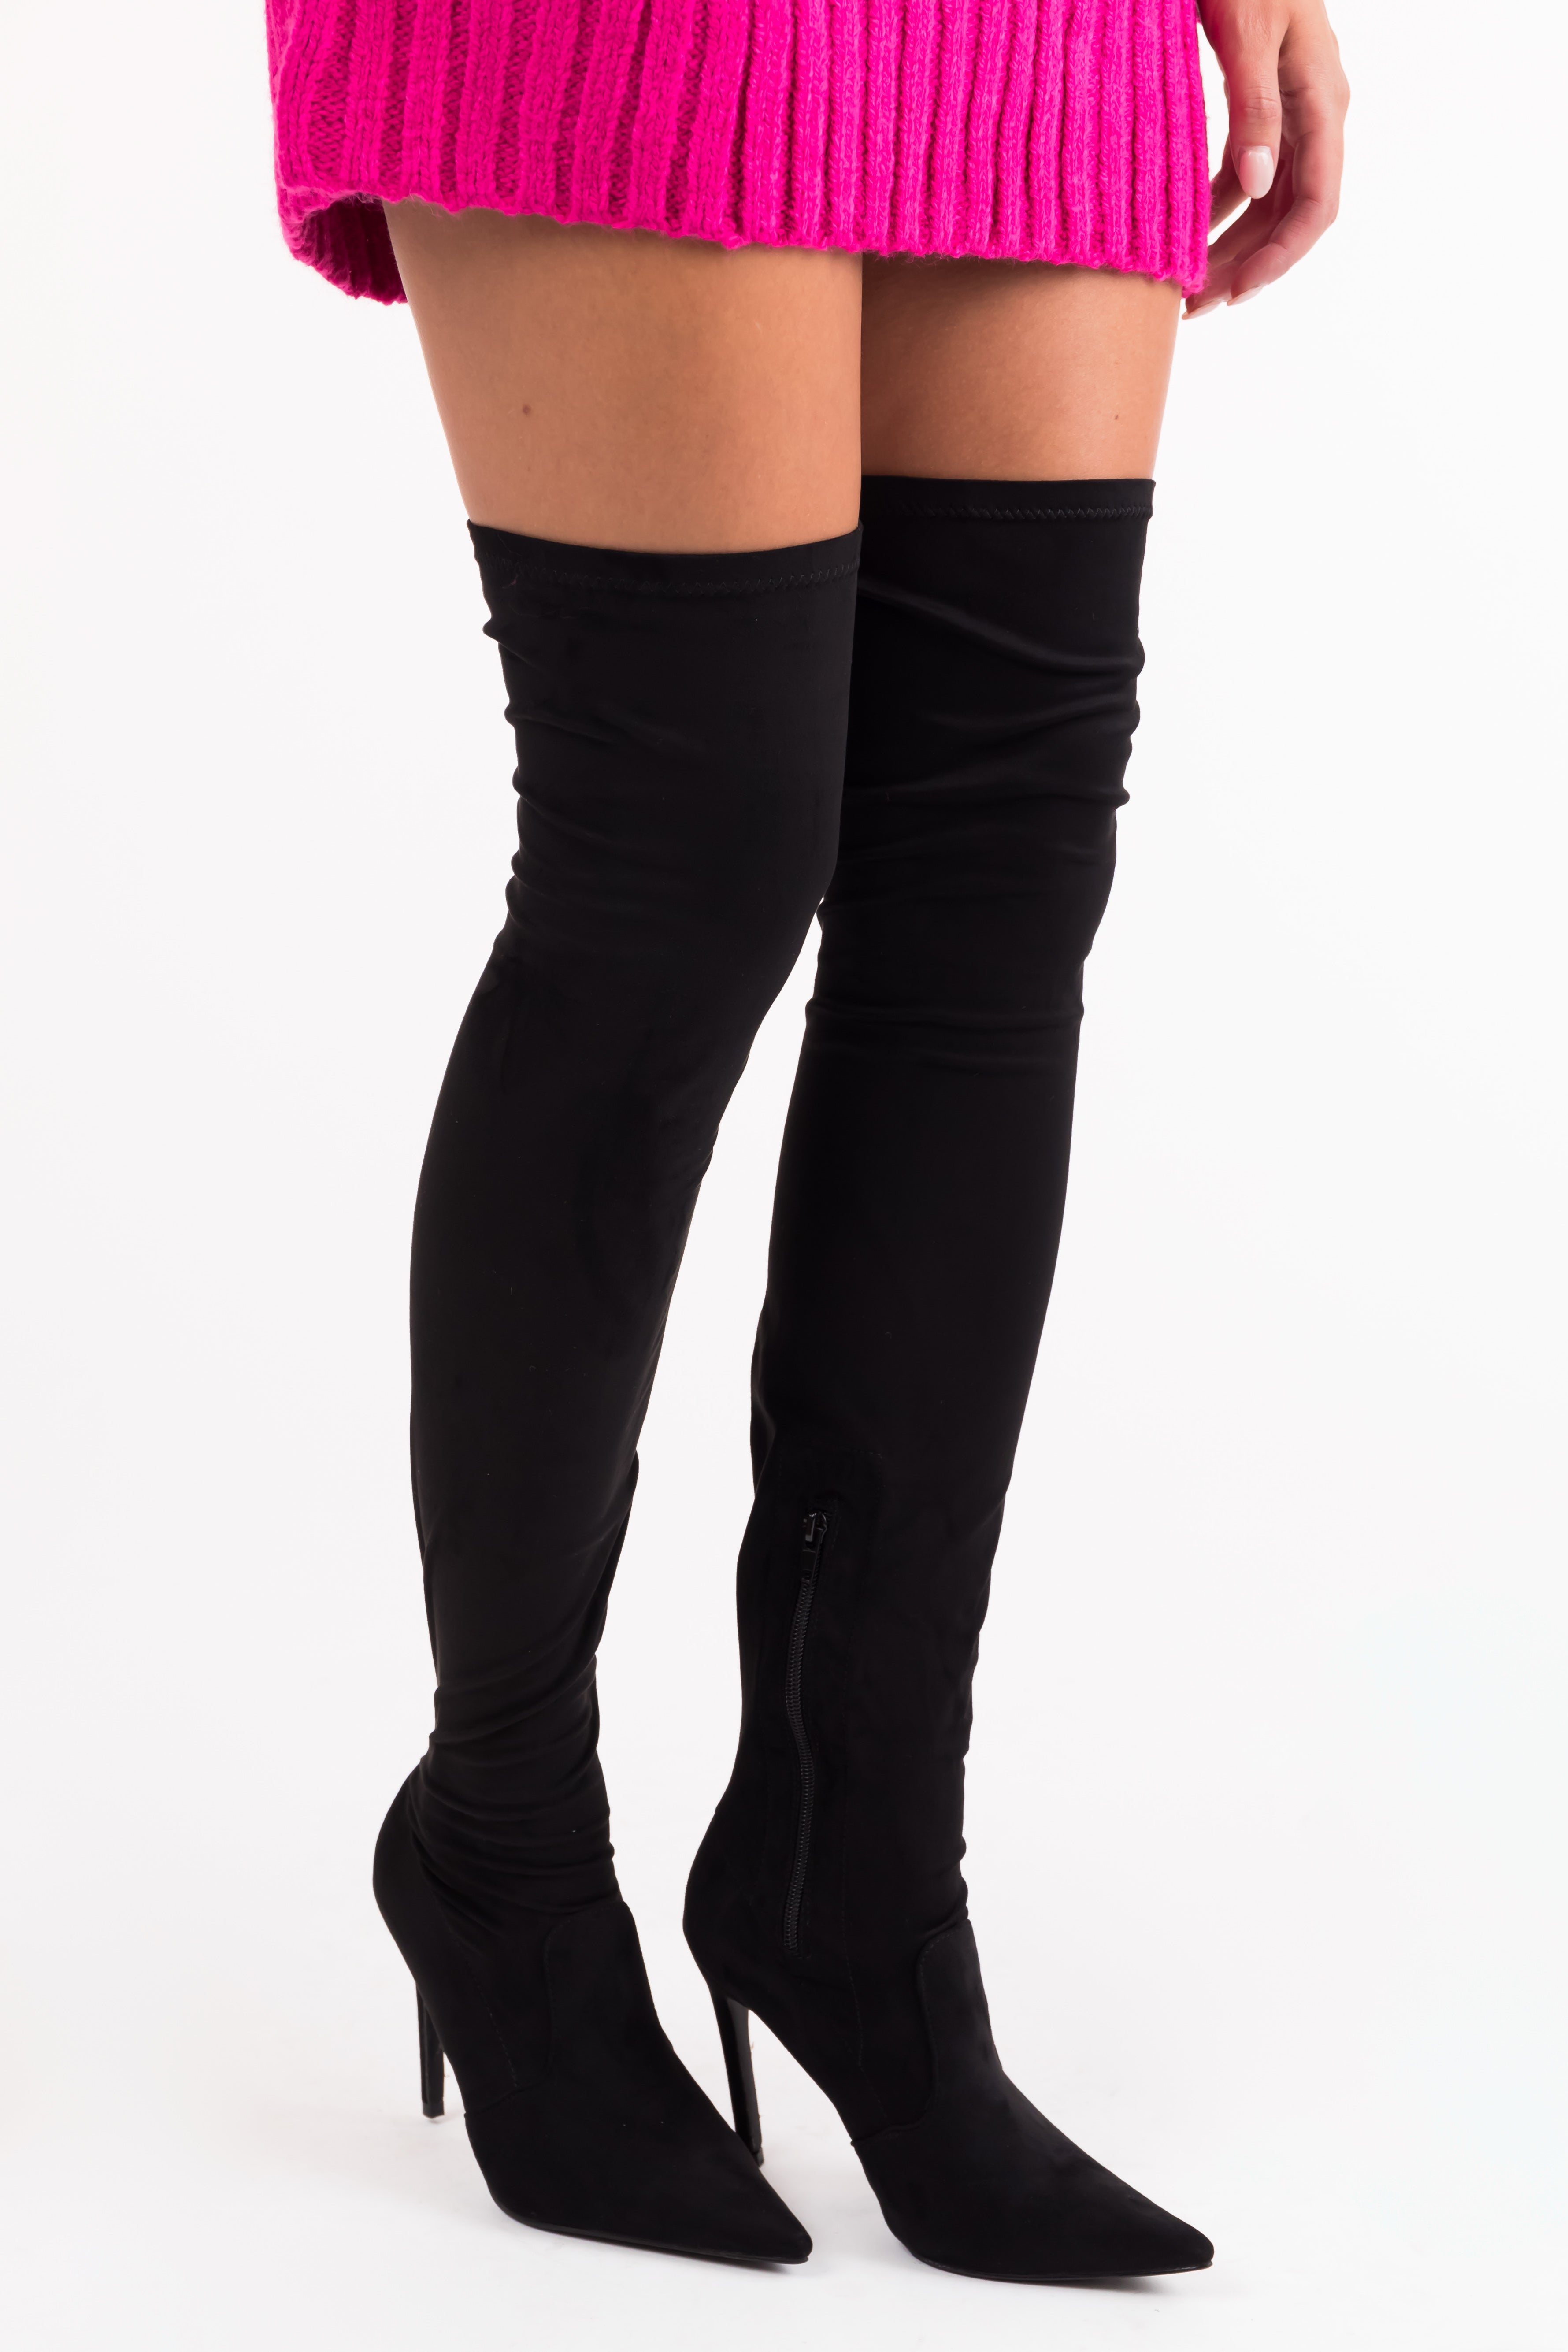 Women Thigh High Platform Boot Black Artificial Corcodile Heels Shoes Large  Size | eBay